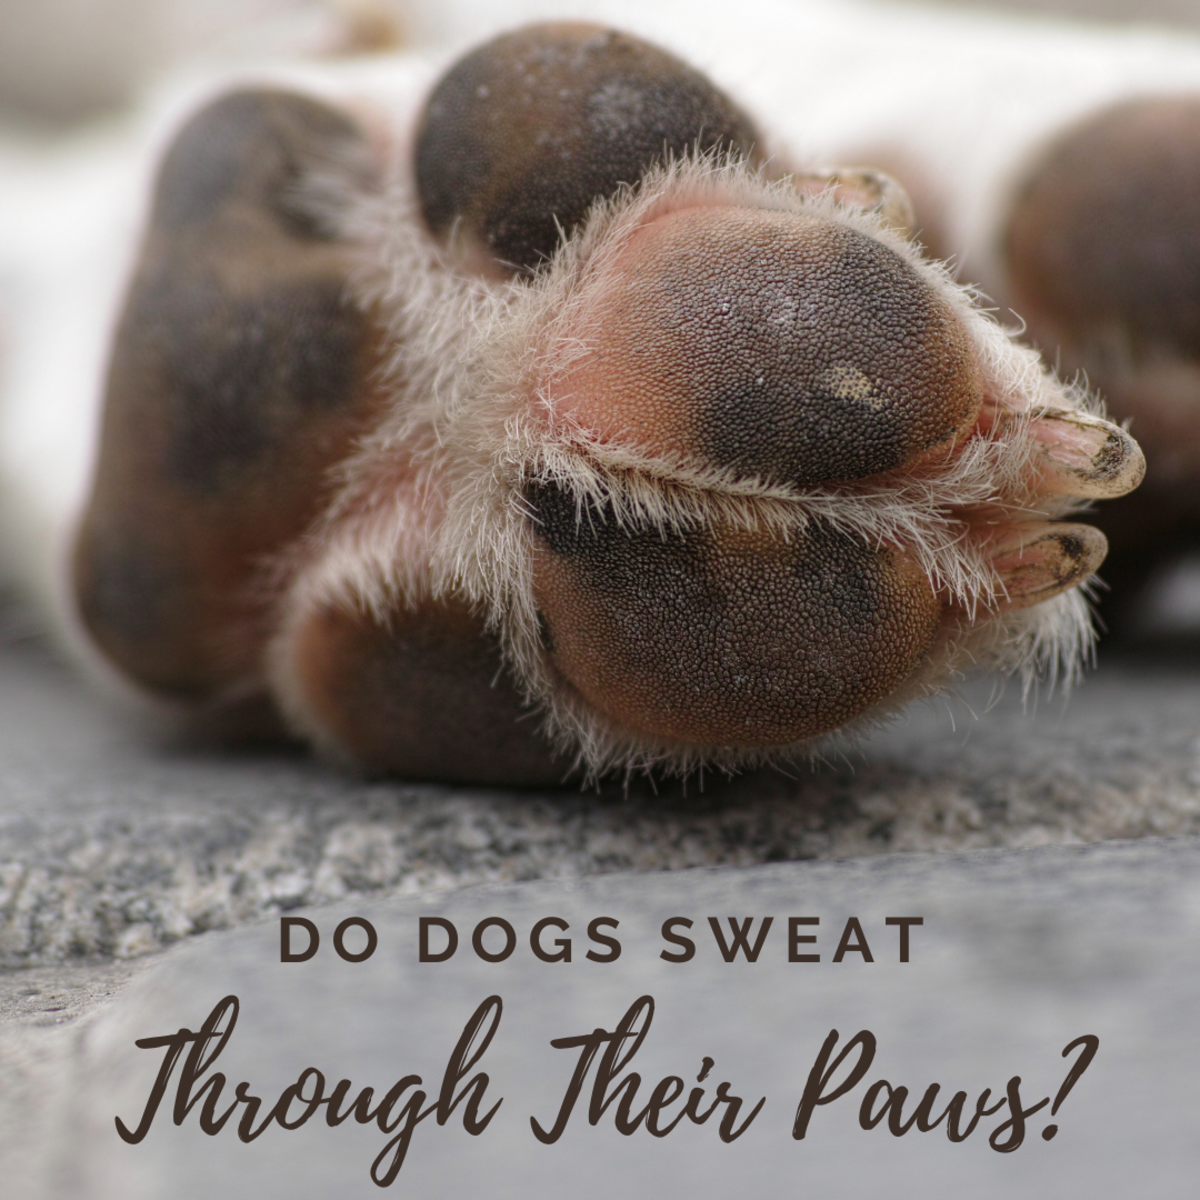 Is it normal for dogs paws to sweat?